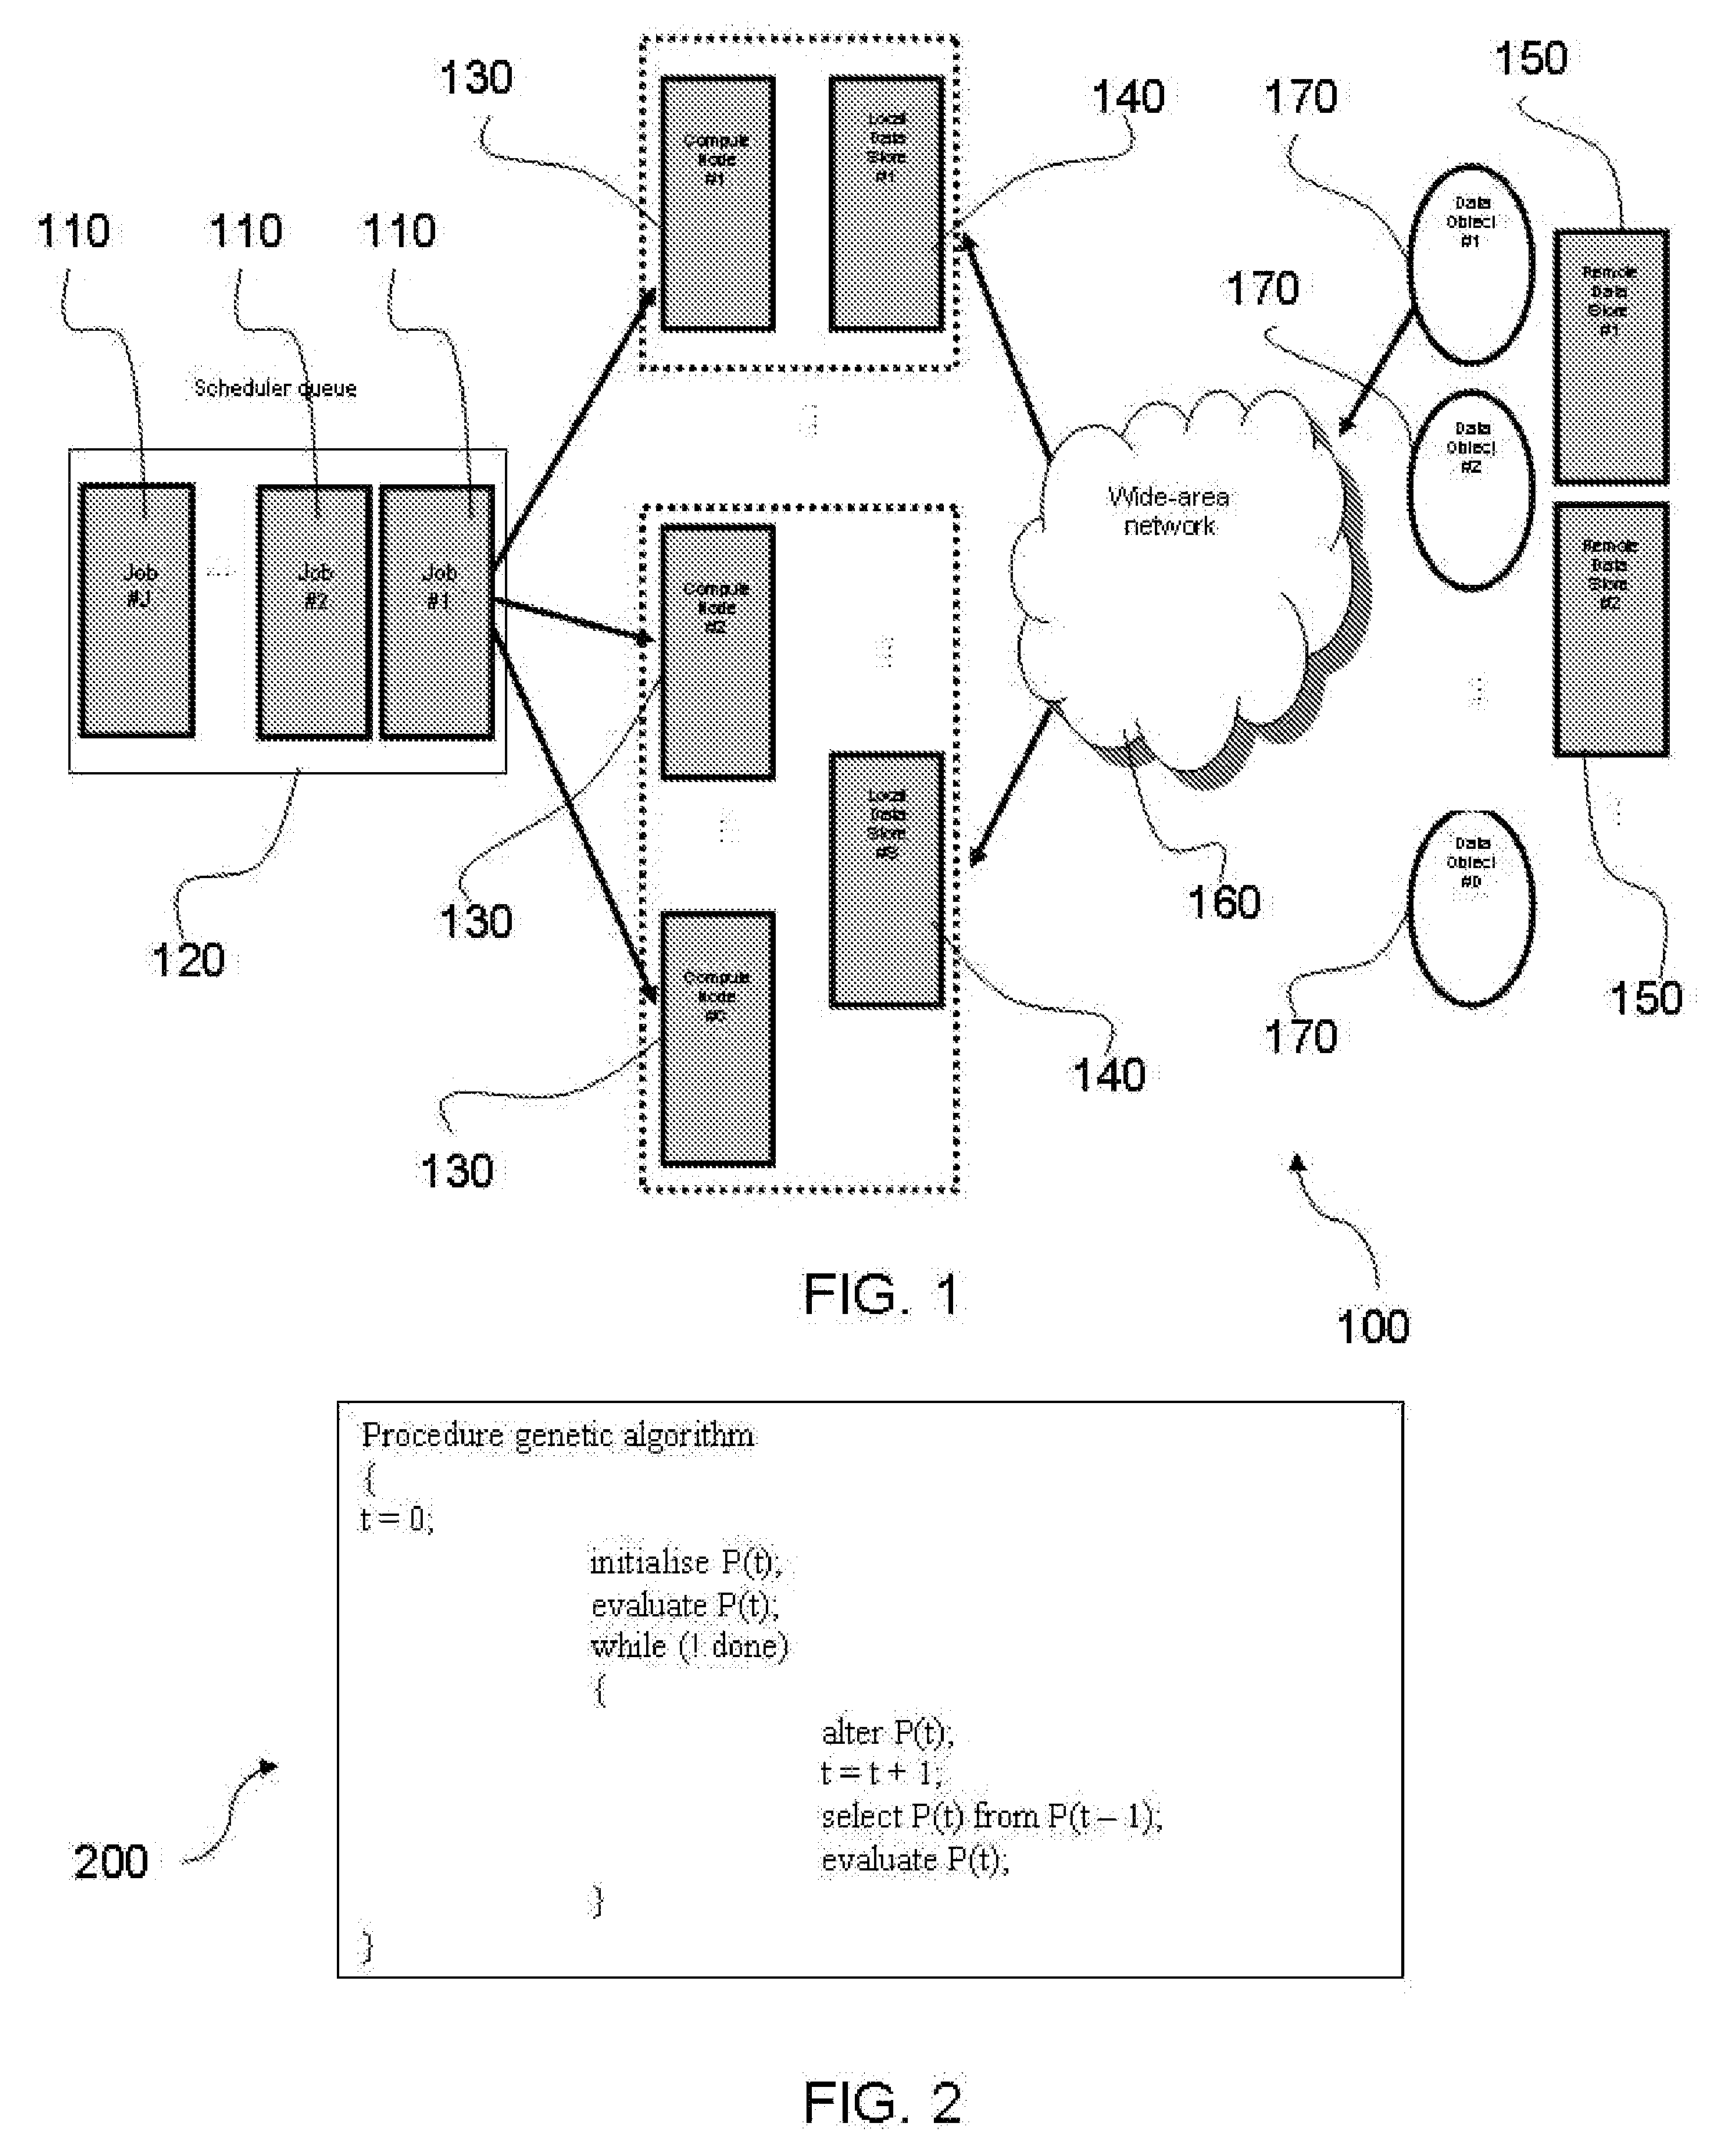 Method and means for co-scheduling job assignments and data replication in wide-area distributed systems